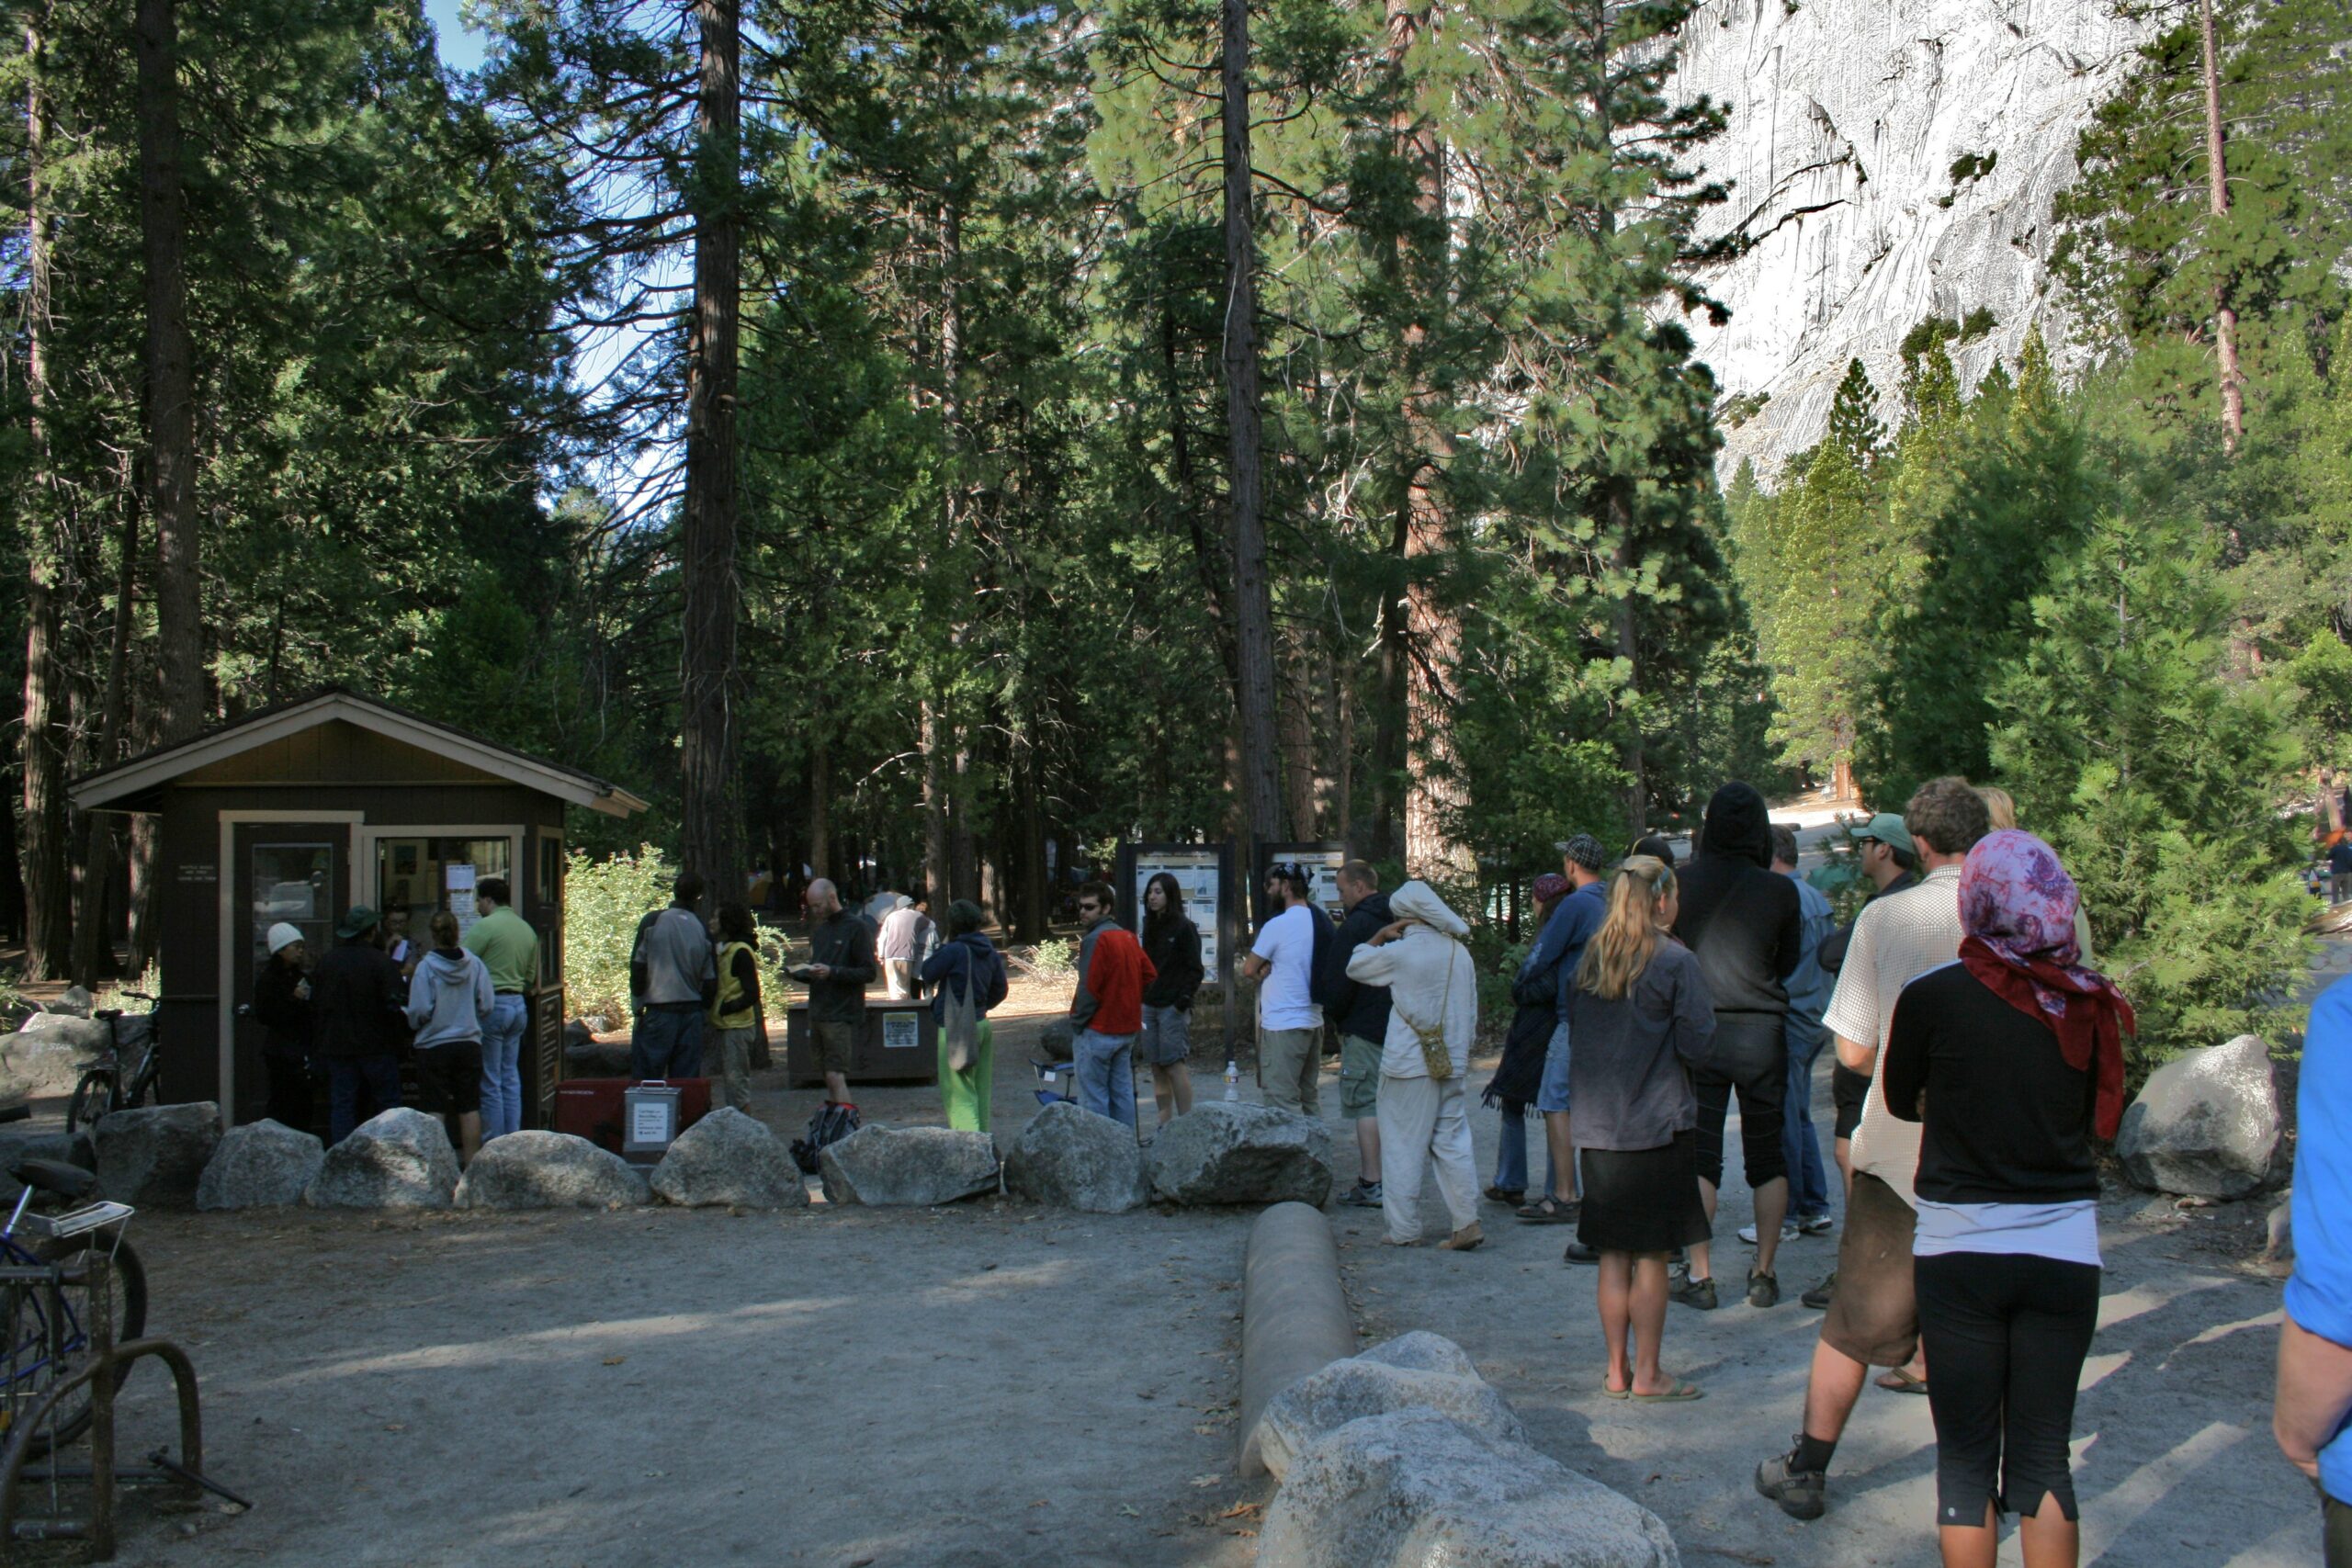 People waiting in line at Camp 4 ranger station